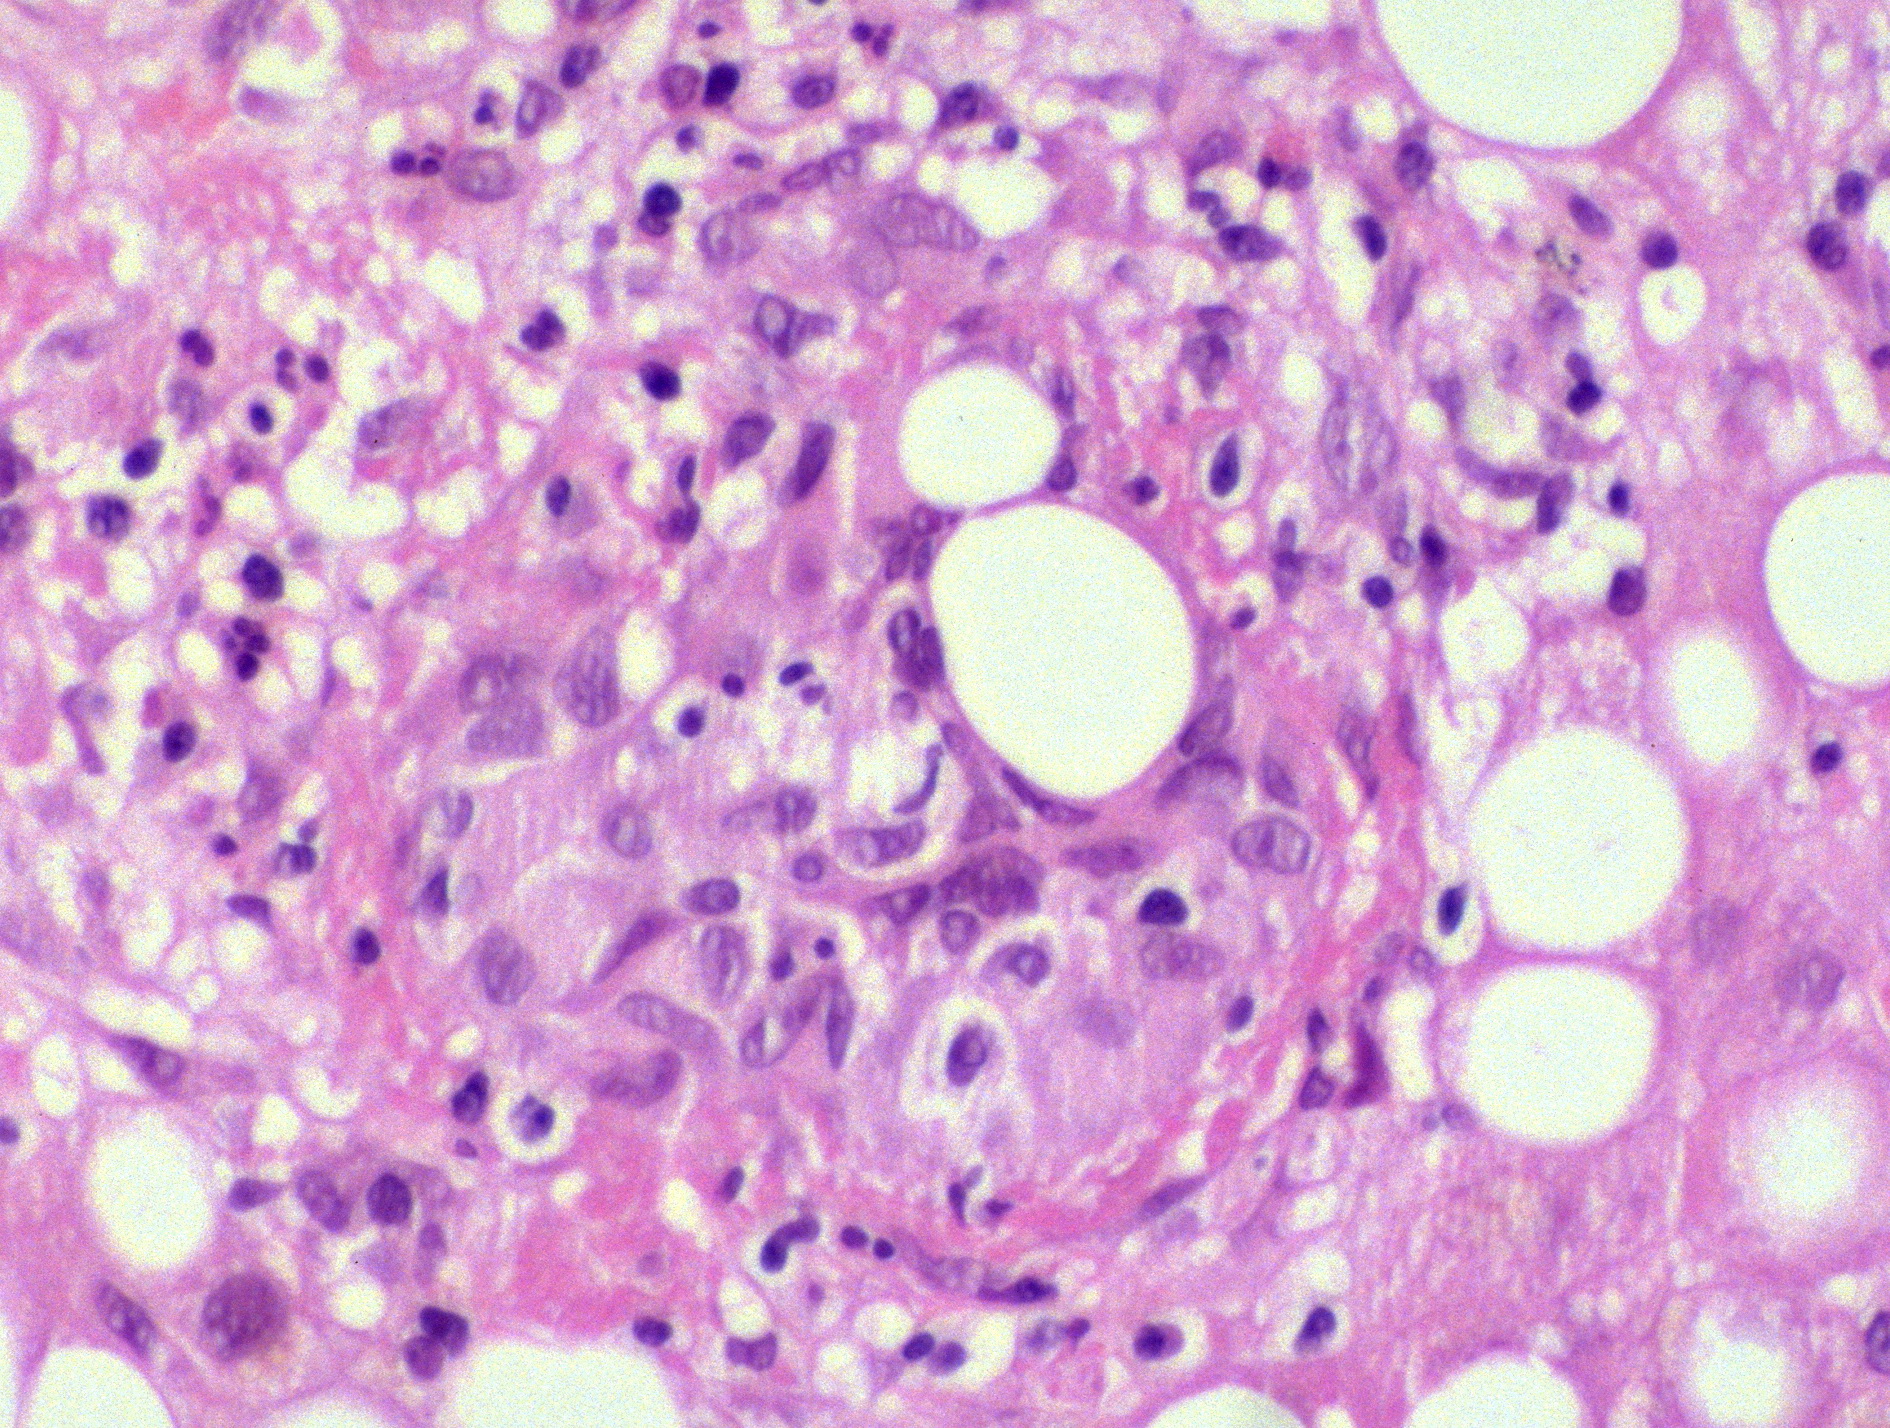 Yale Rosen on Twitter: "Fibrin ring granulomas are rare, occurring mostly  in liver and bone marrow. Best known for occurrence in Q fever but also  reported in EBV, visceral leishmaniasis, toxoplasmosis, Hodgkin